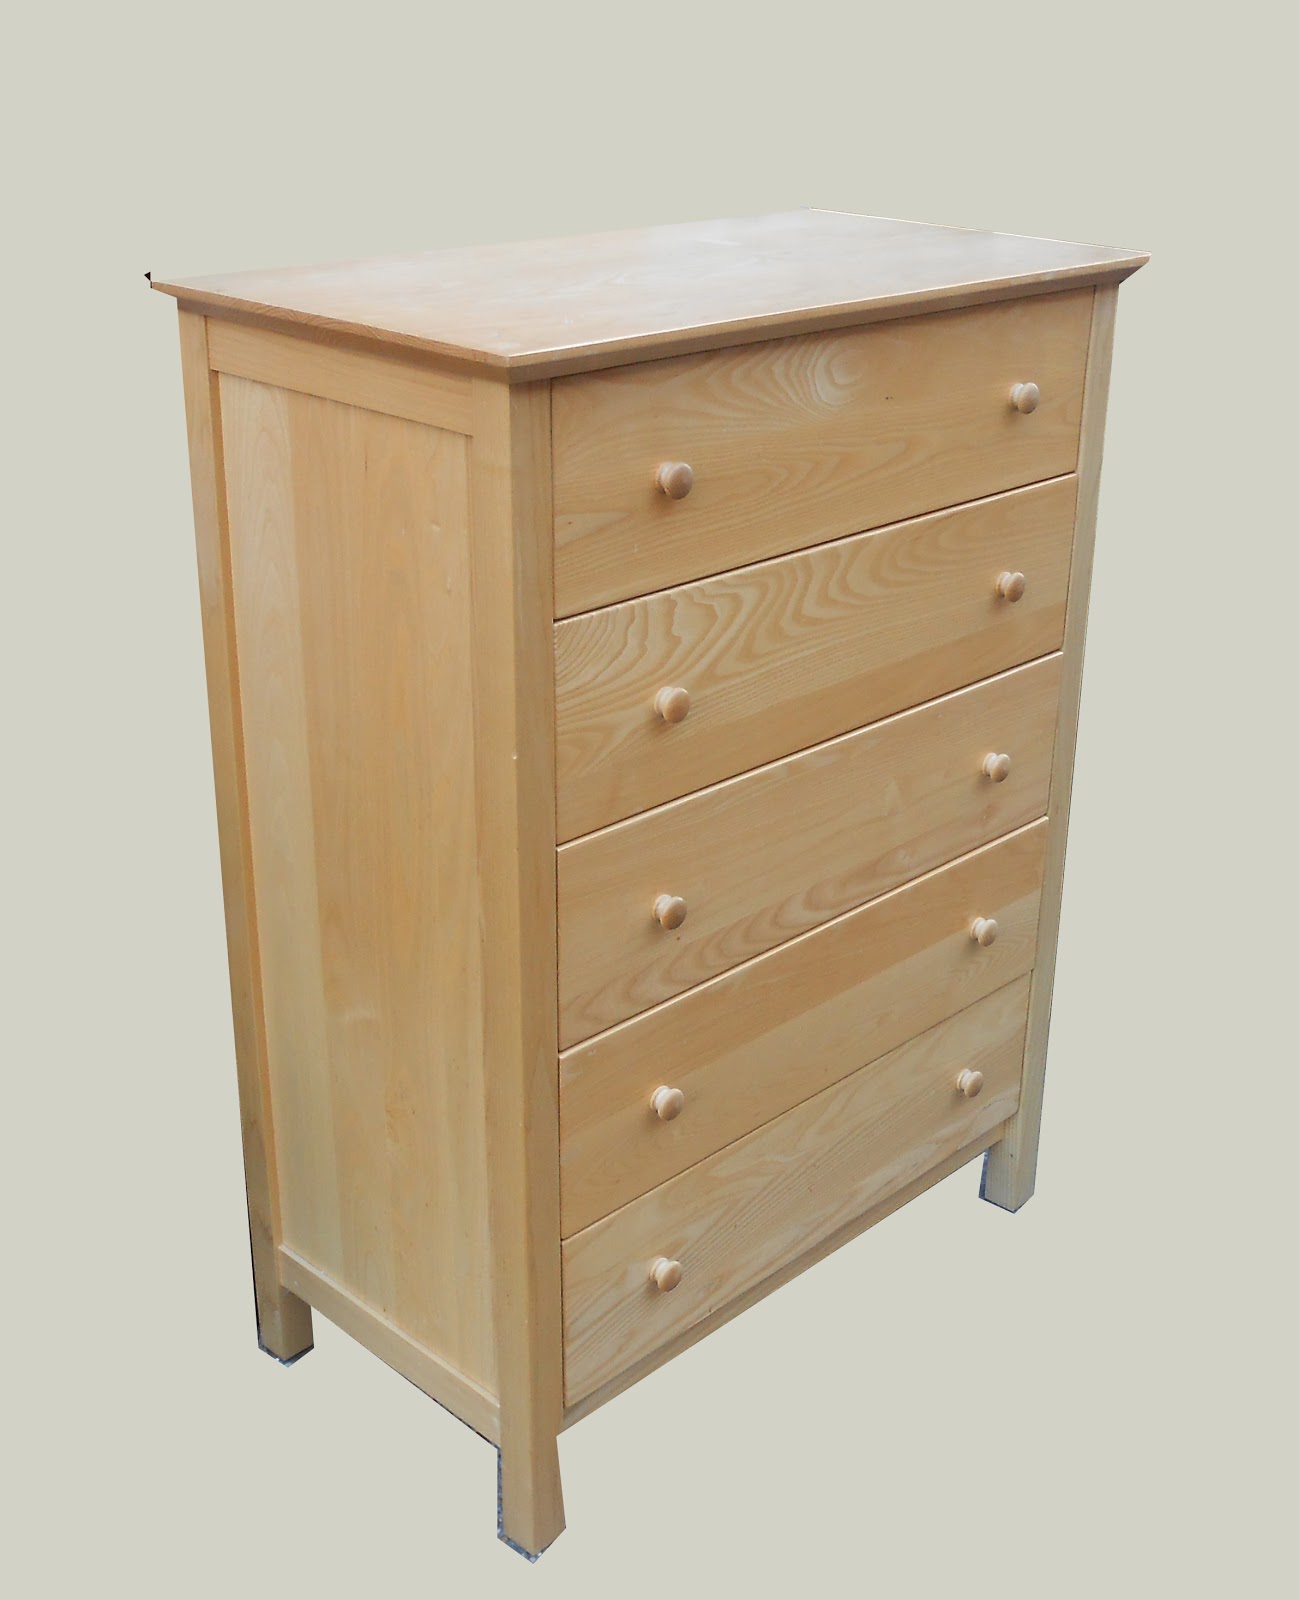 Uhuru Furniture Collectibles Vermont Tubbs Woodstock Chest Of